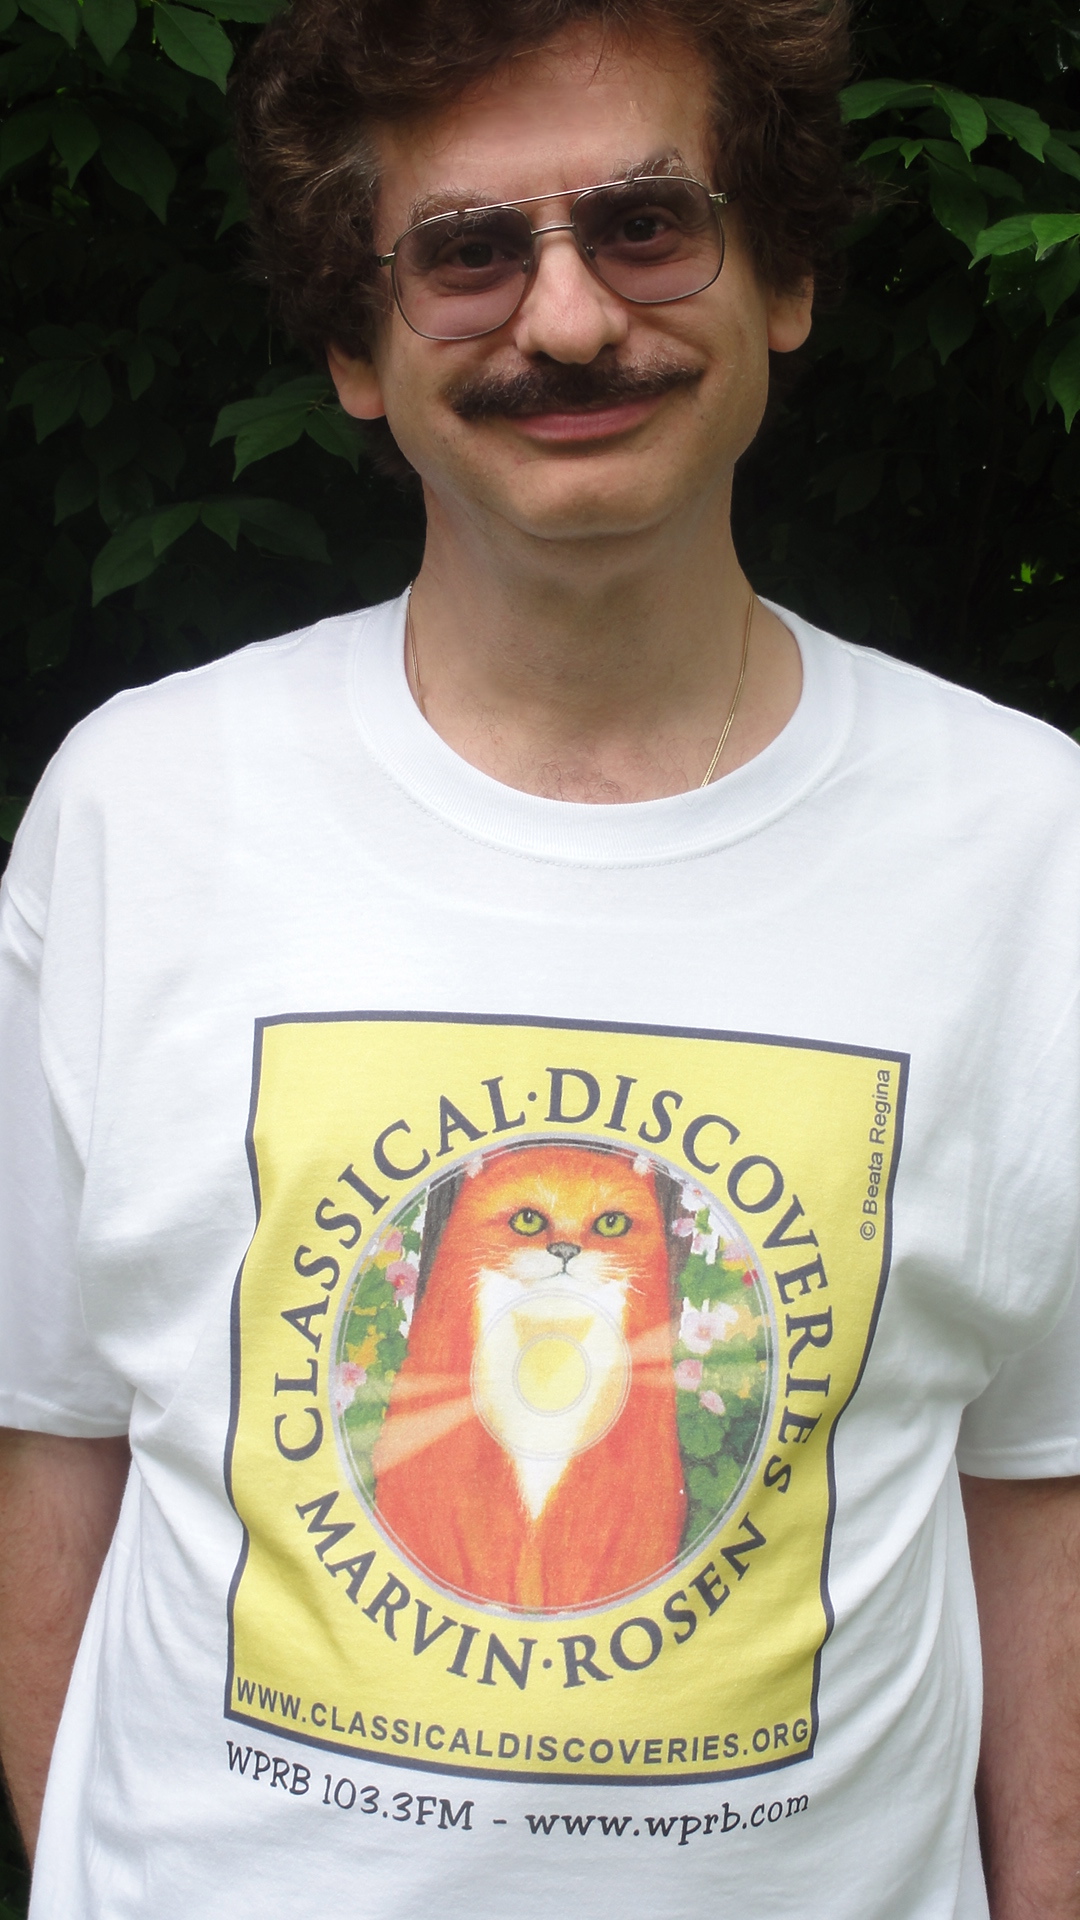 Classical Discoveries t-shirt